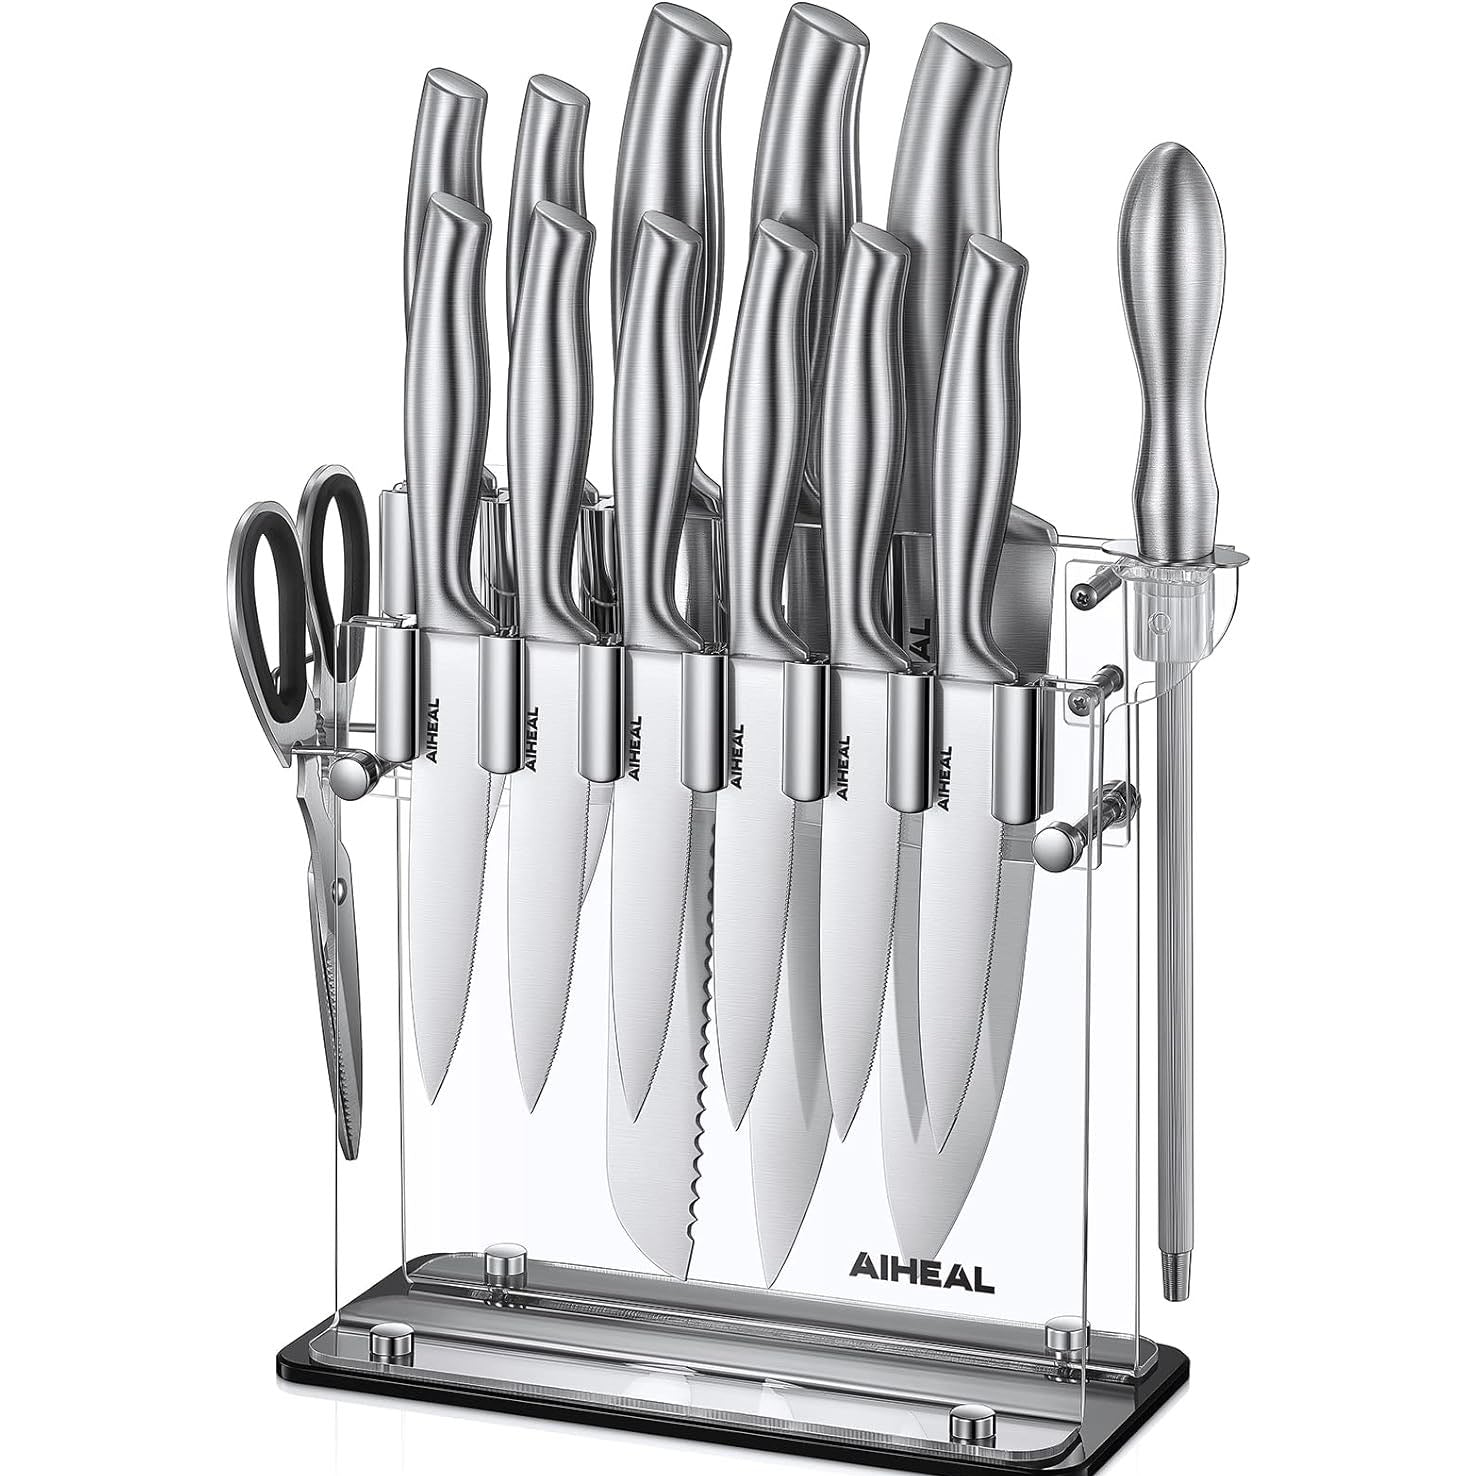 KD 14 PCS Stainless Steel Kitchen Knife Set with Block